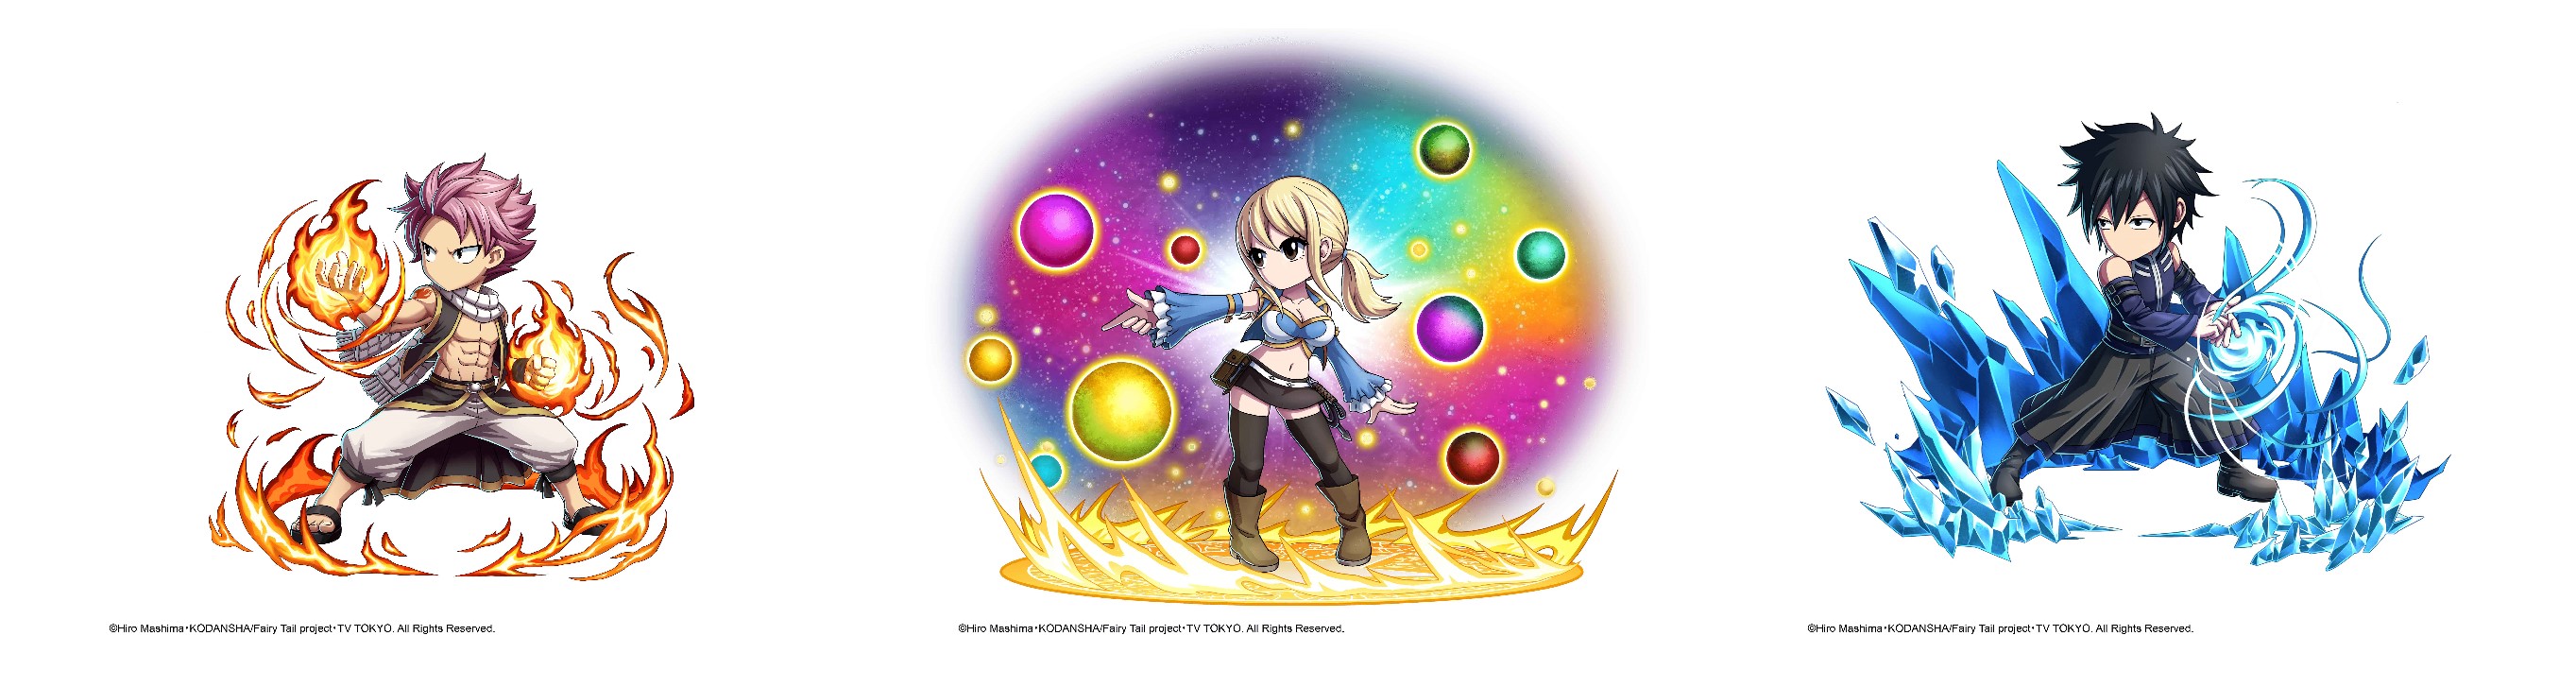 Brave Frontier x Fairy Tail Collaboration.